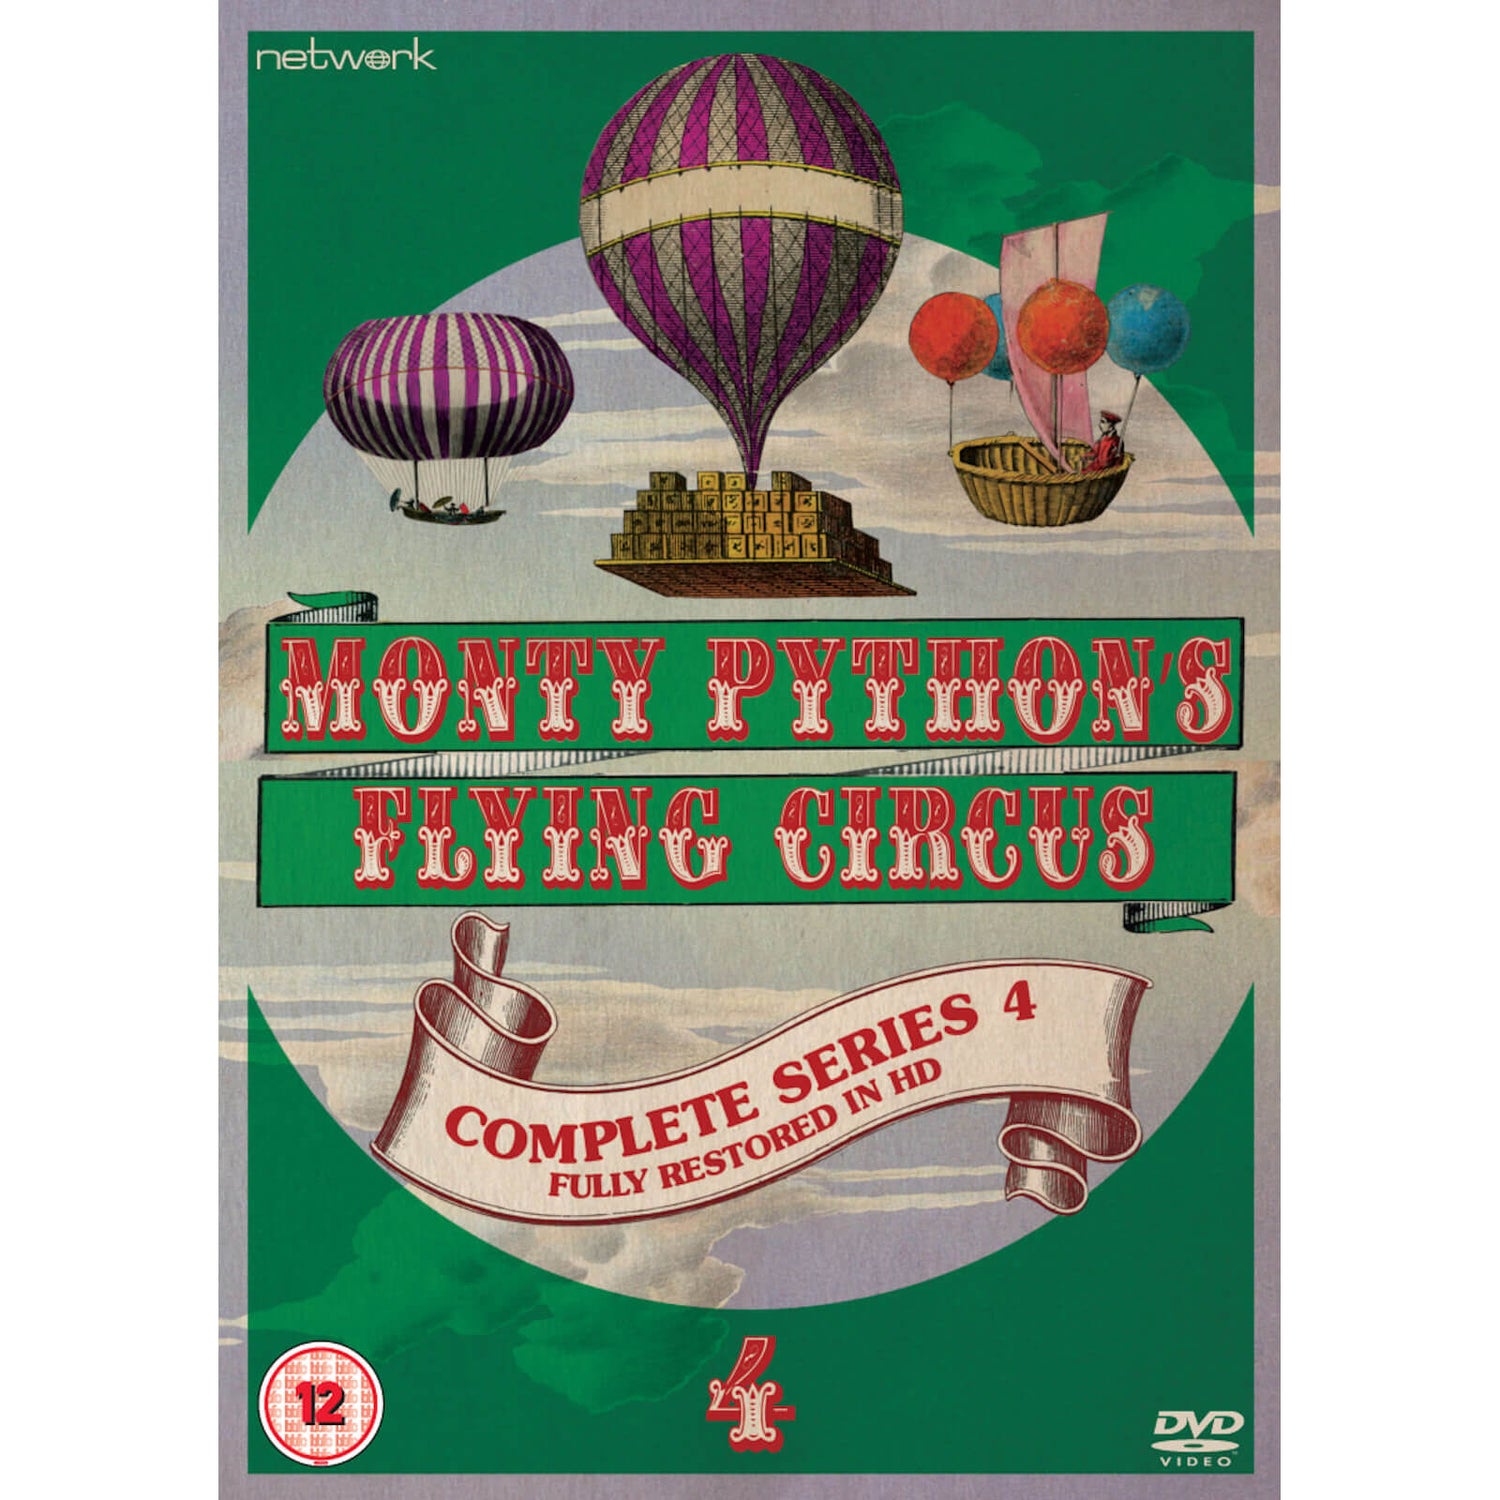 Monty Python's Flying Circus: The Complete Series 4 DVD - Zavvi UK